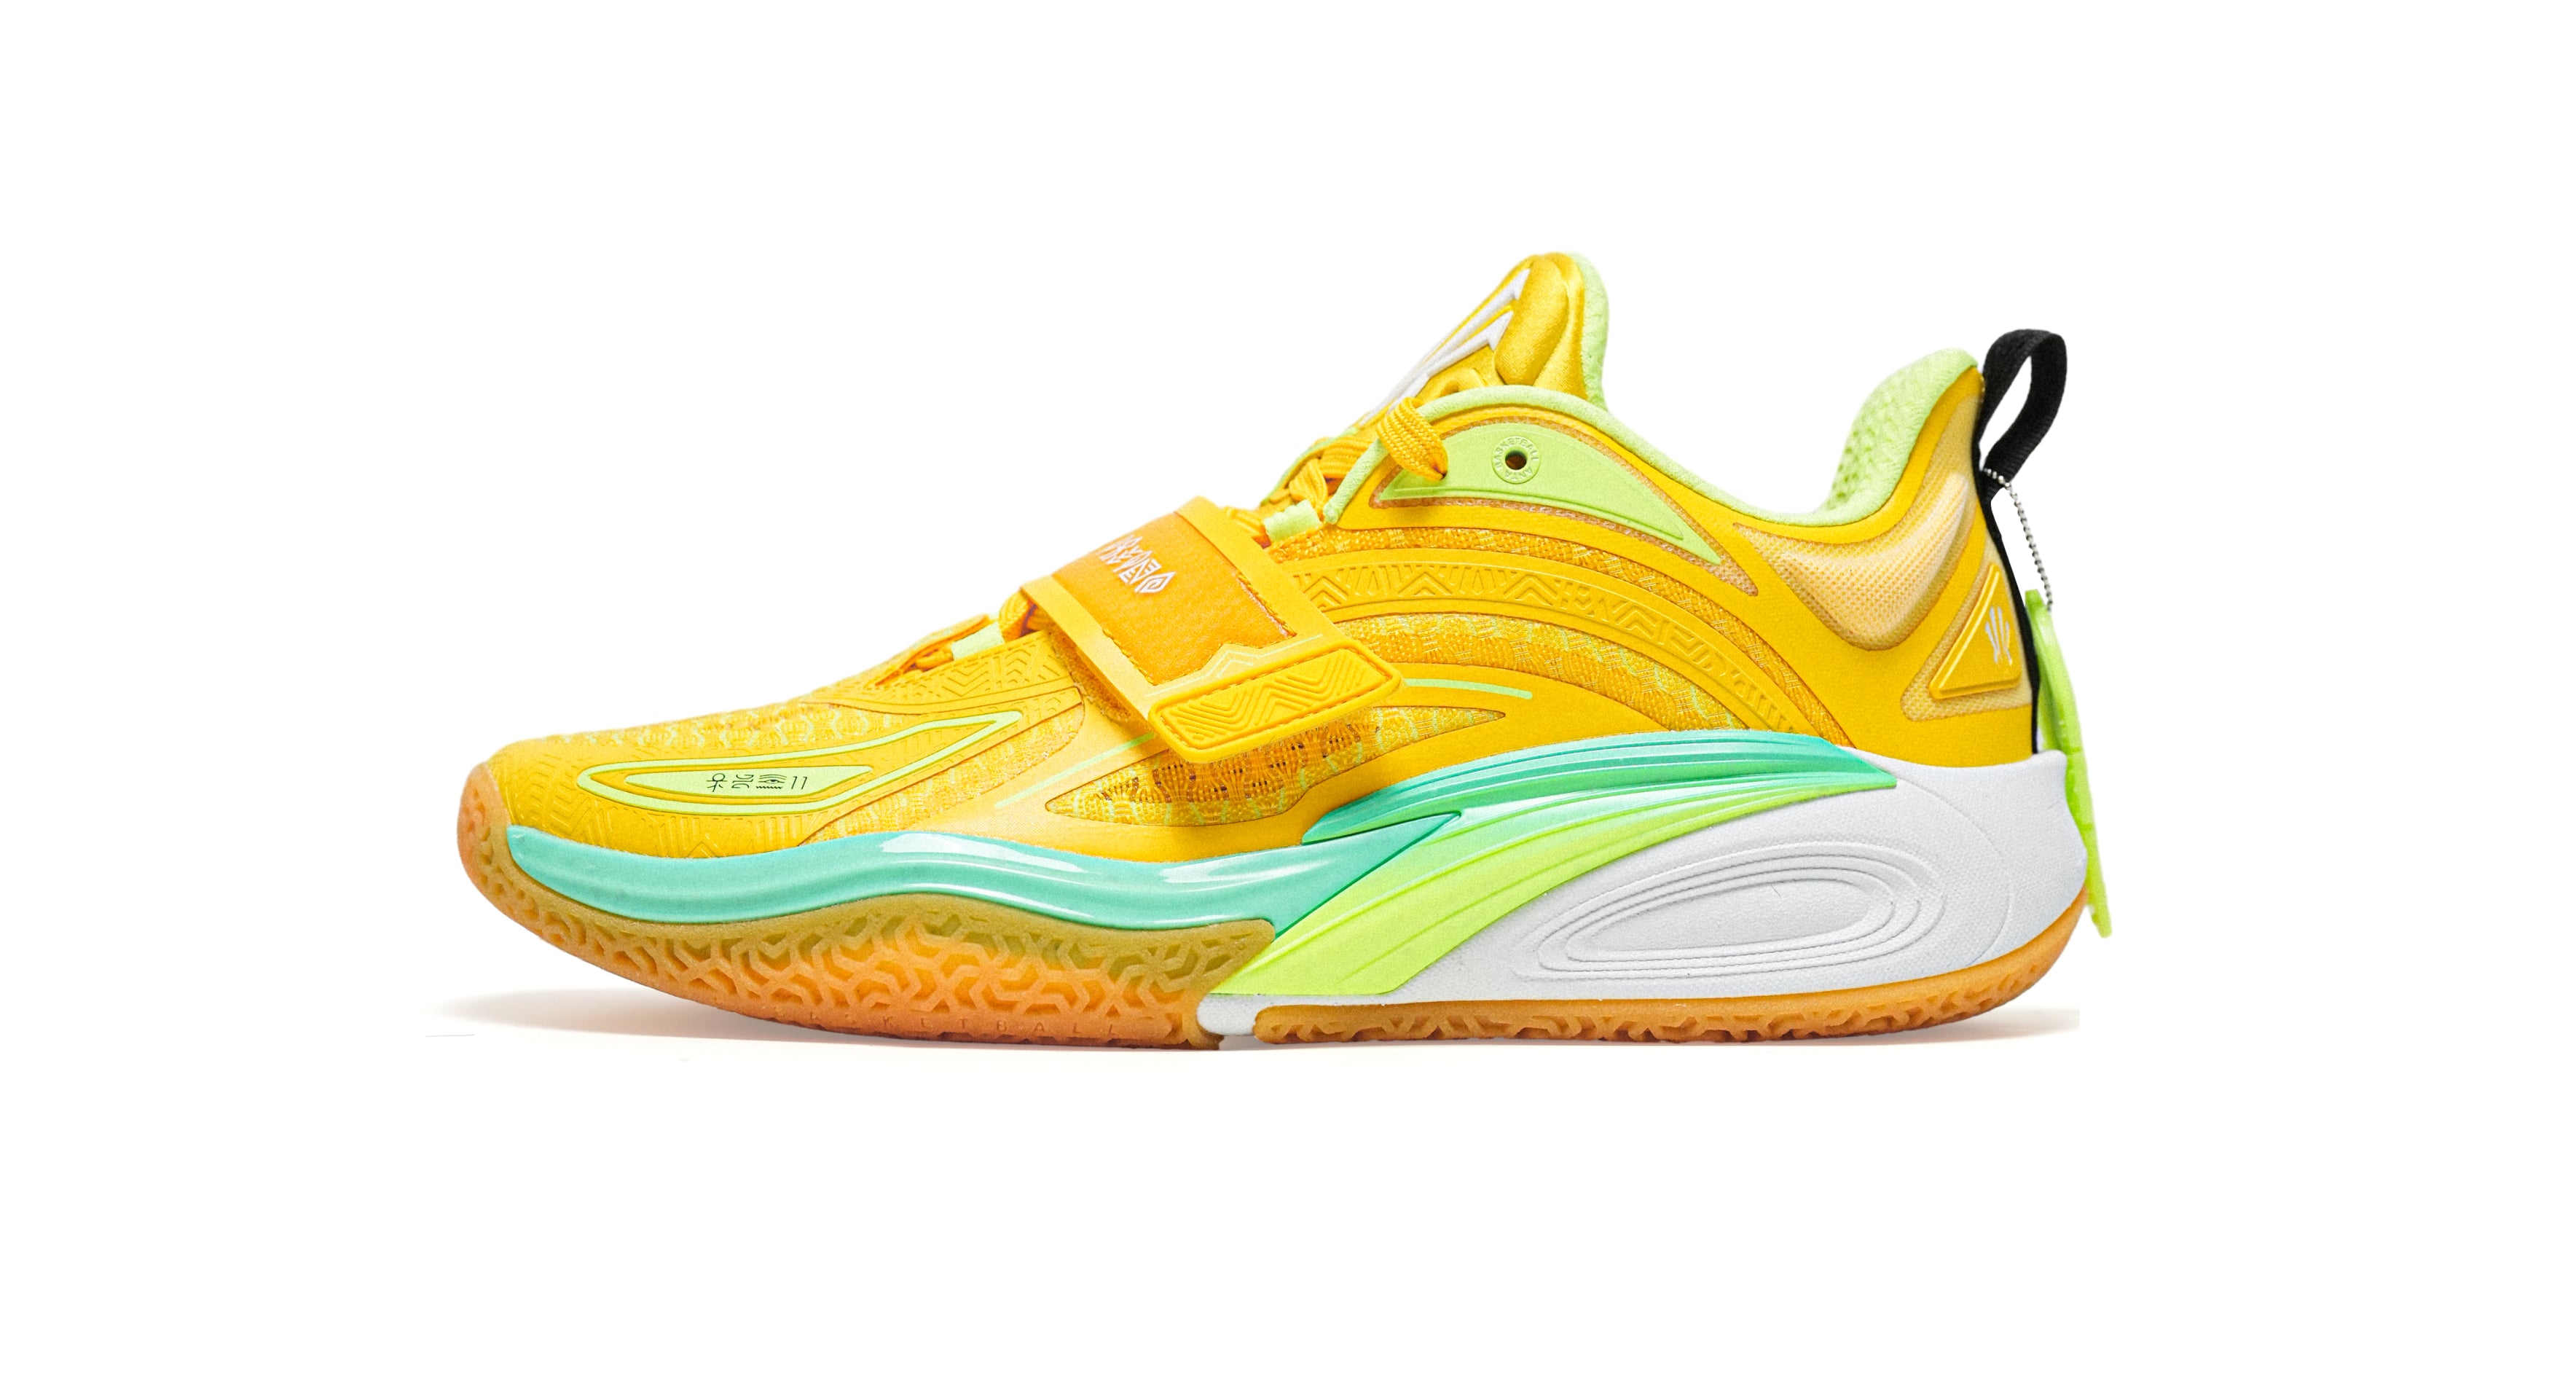 ANTA KAI 1 "Playoffs Energy" Basketball Shoes by Kyire Irving